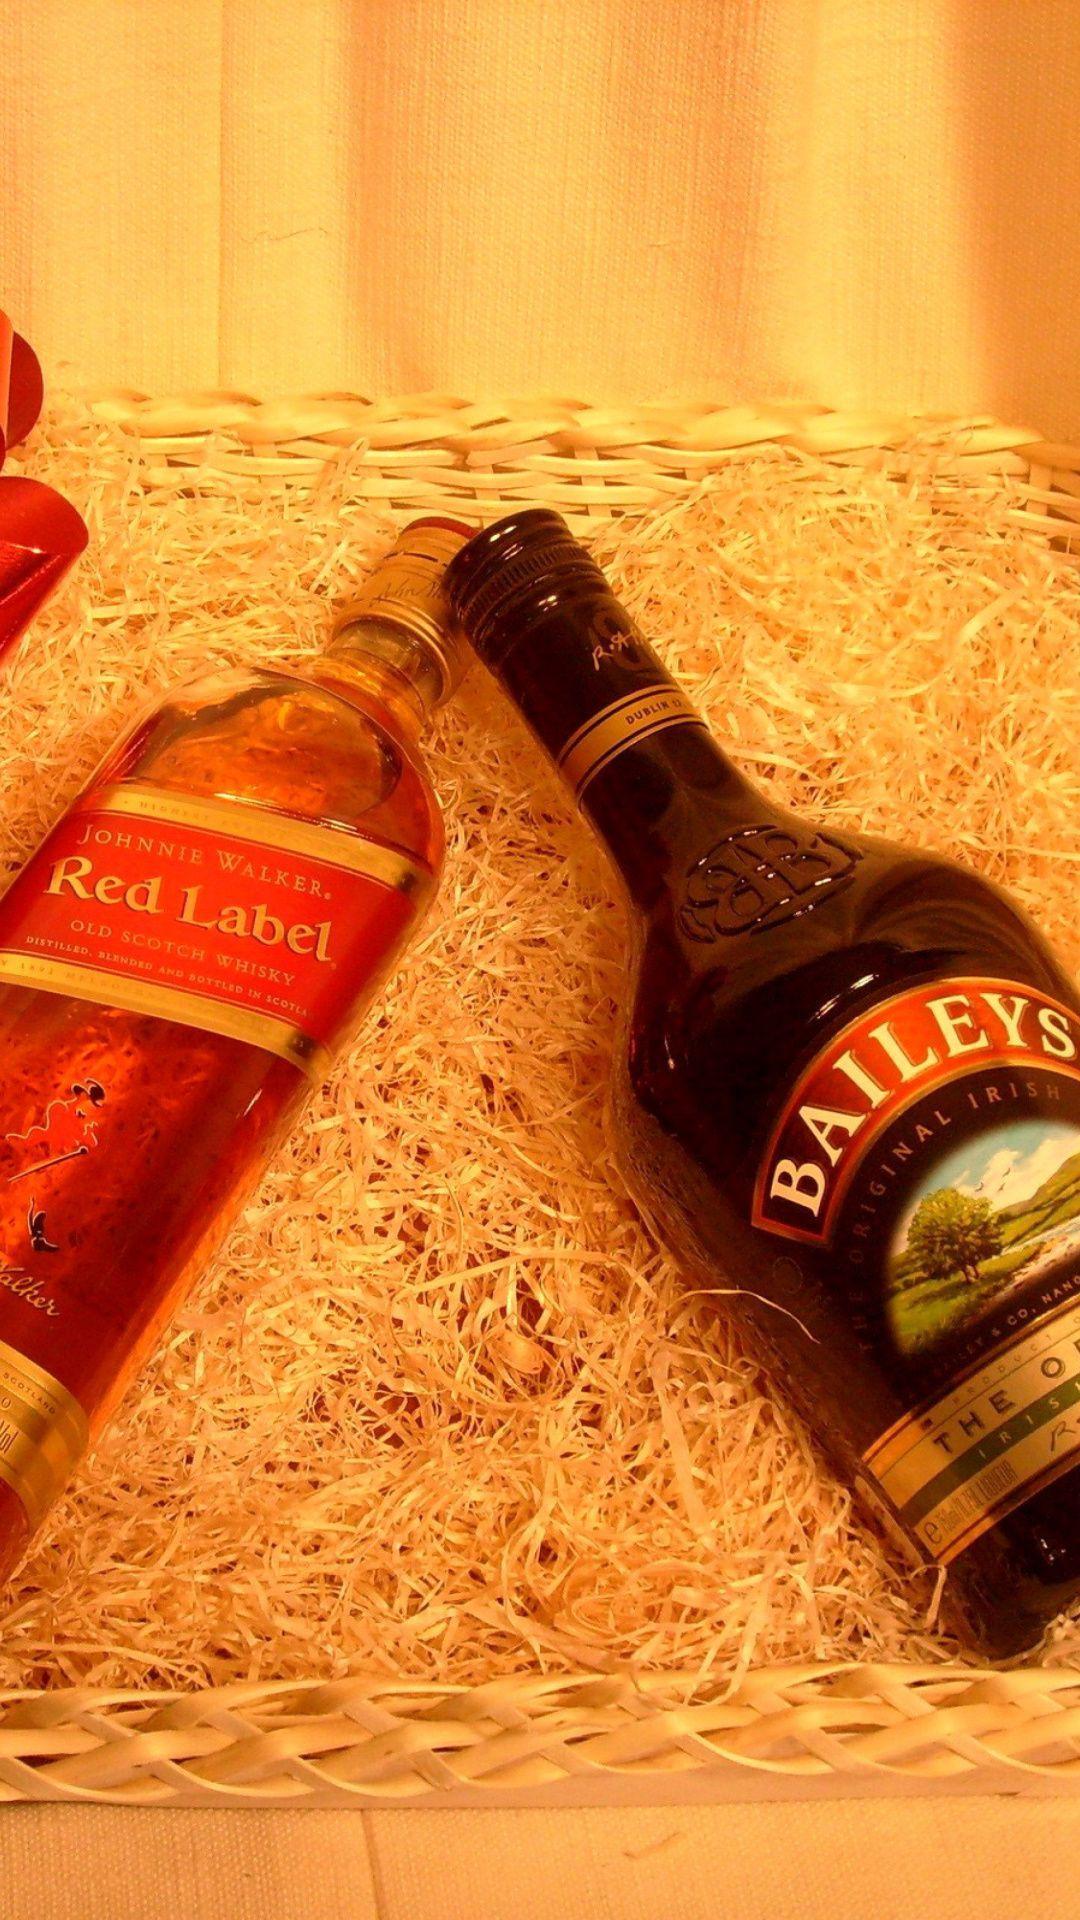 Baileys and red label iphone 6 HD wallpaper